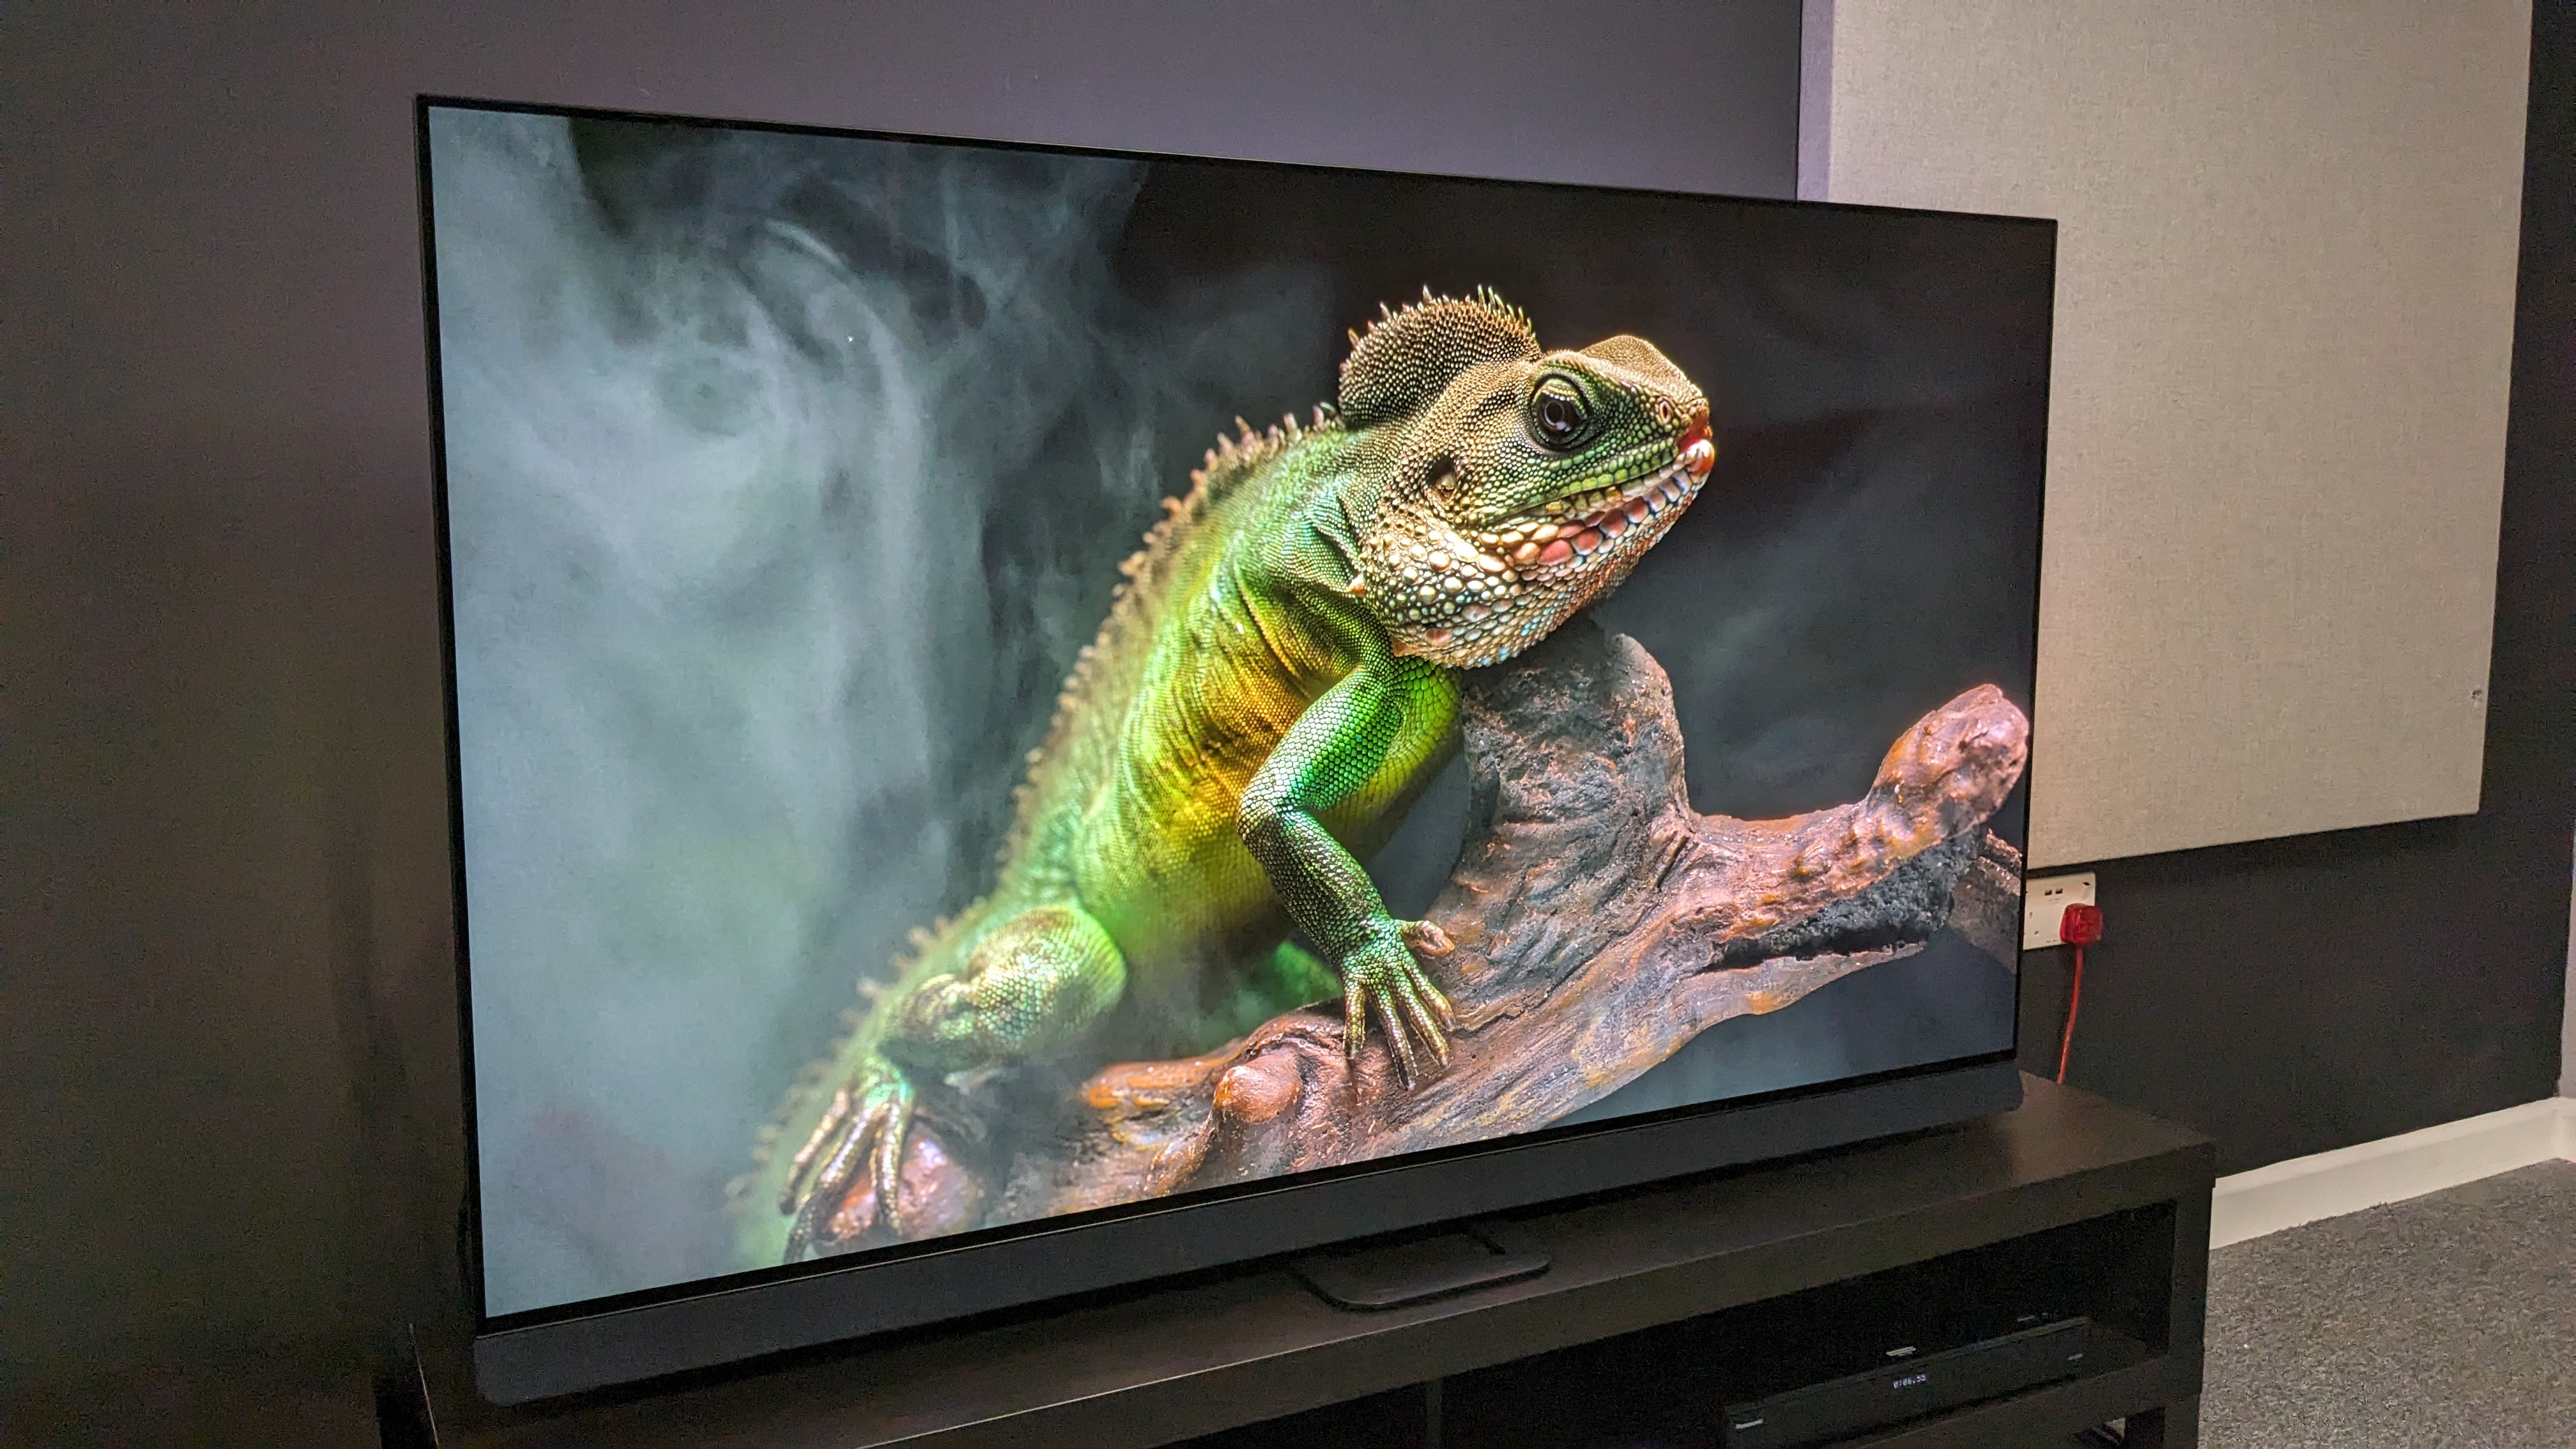 Philips OLED908 with reptile on screen